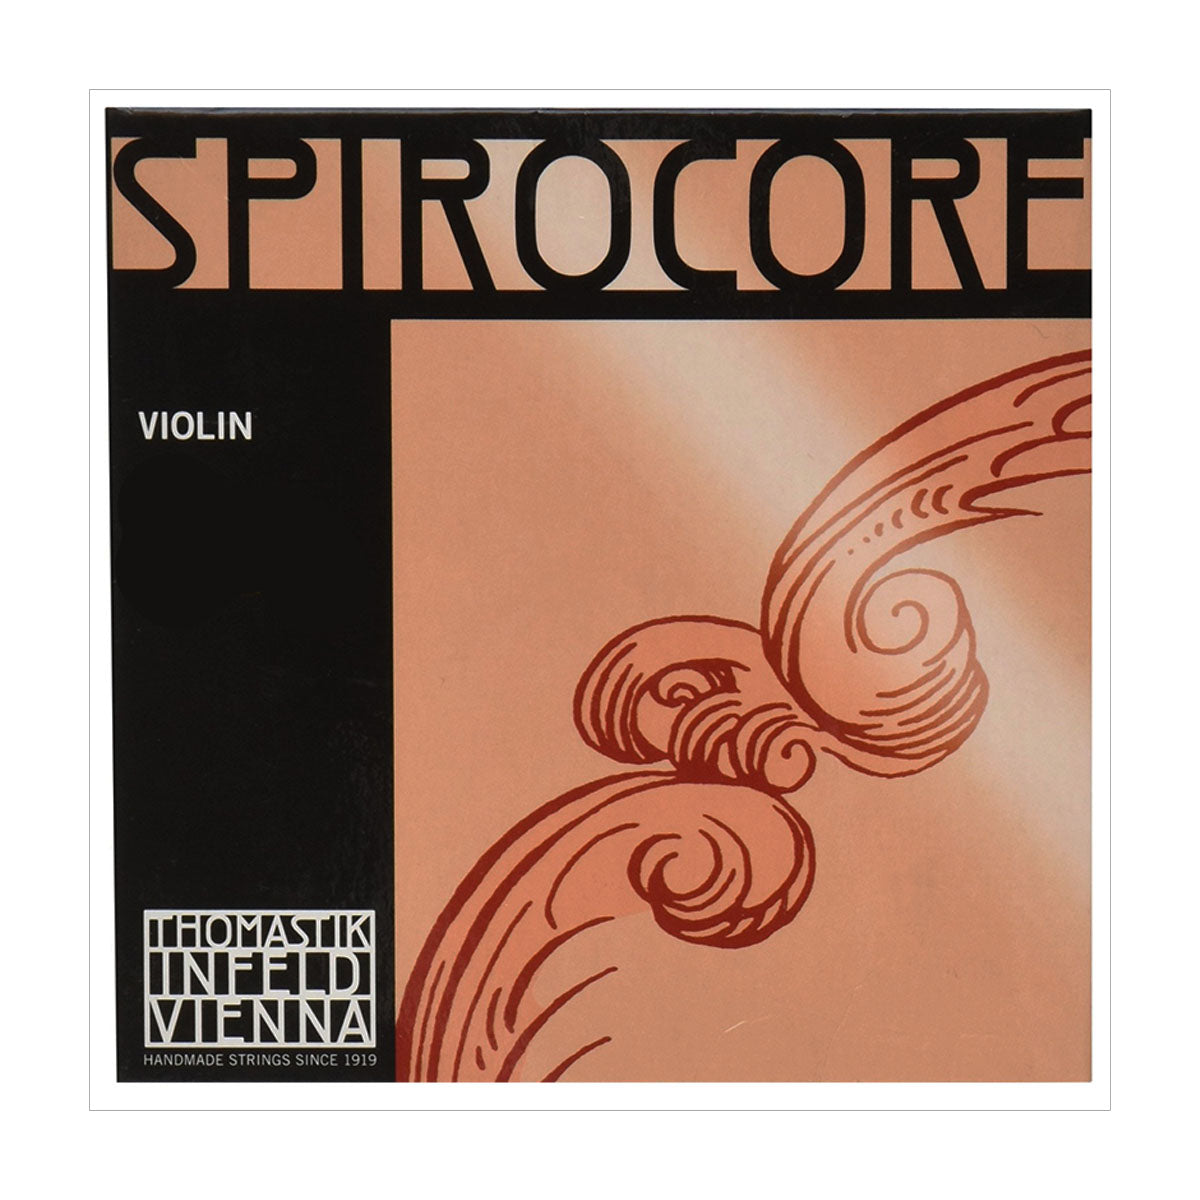 Spirocore Violin Strings, steel core, Thomastik Infeld, Austria, full size, 4/4, 3/4, 1/2, 1/4, 1/8, 1/16, hand-picked and inspected by Violins and such, with TEO musical Instruments, London Ontario Canada